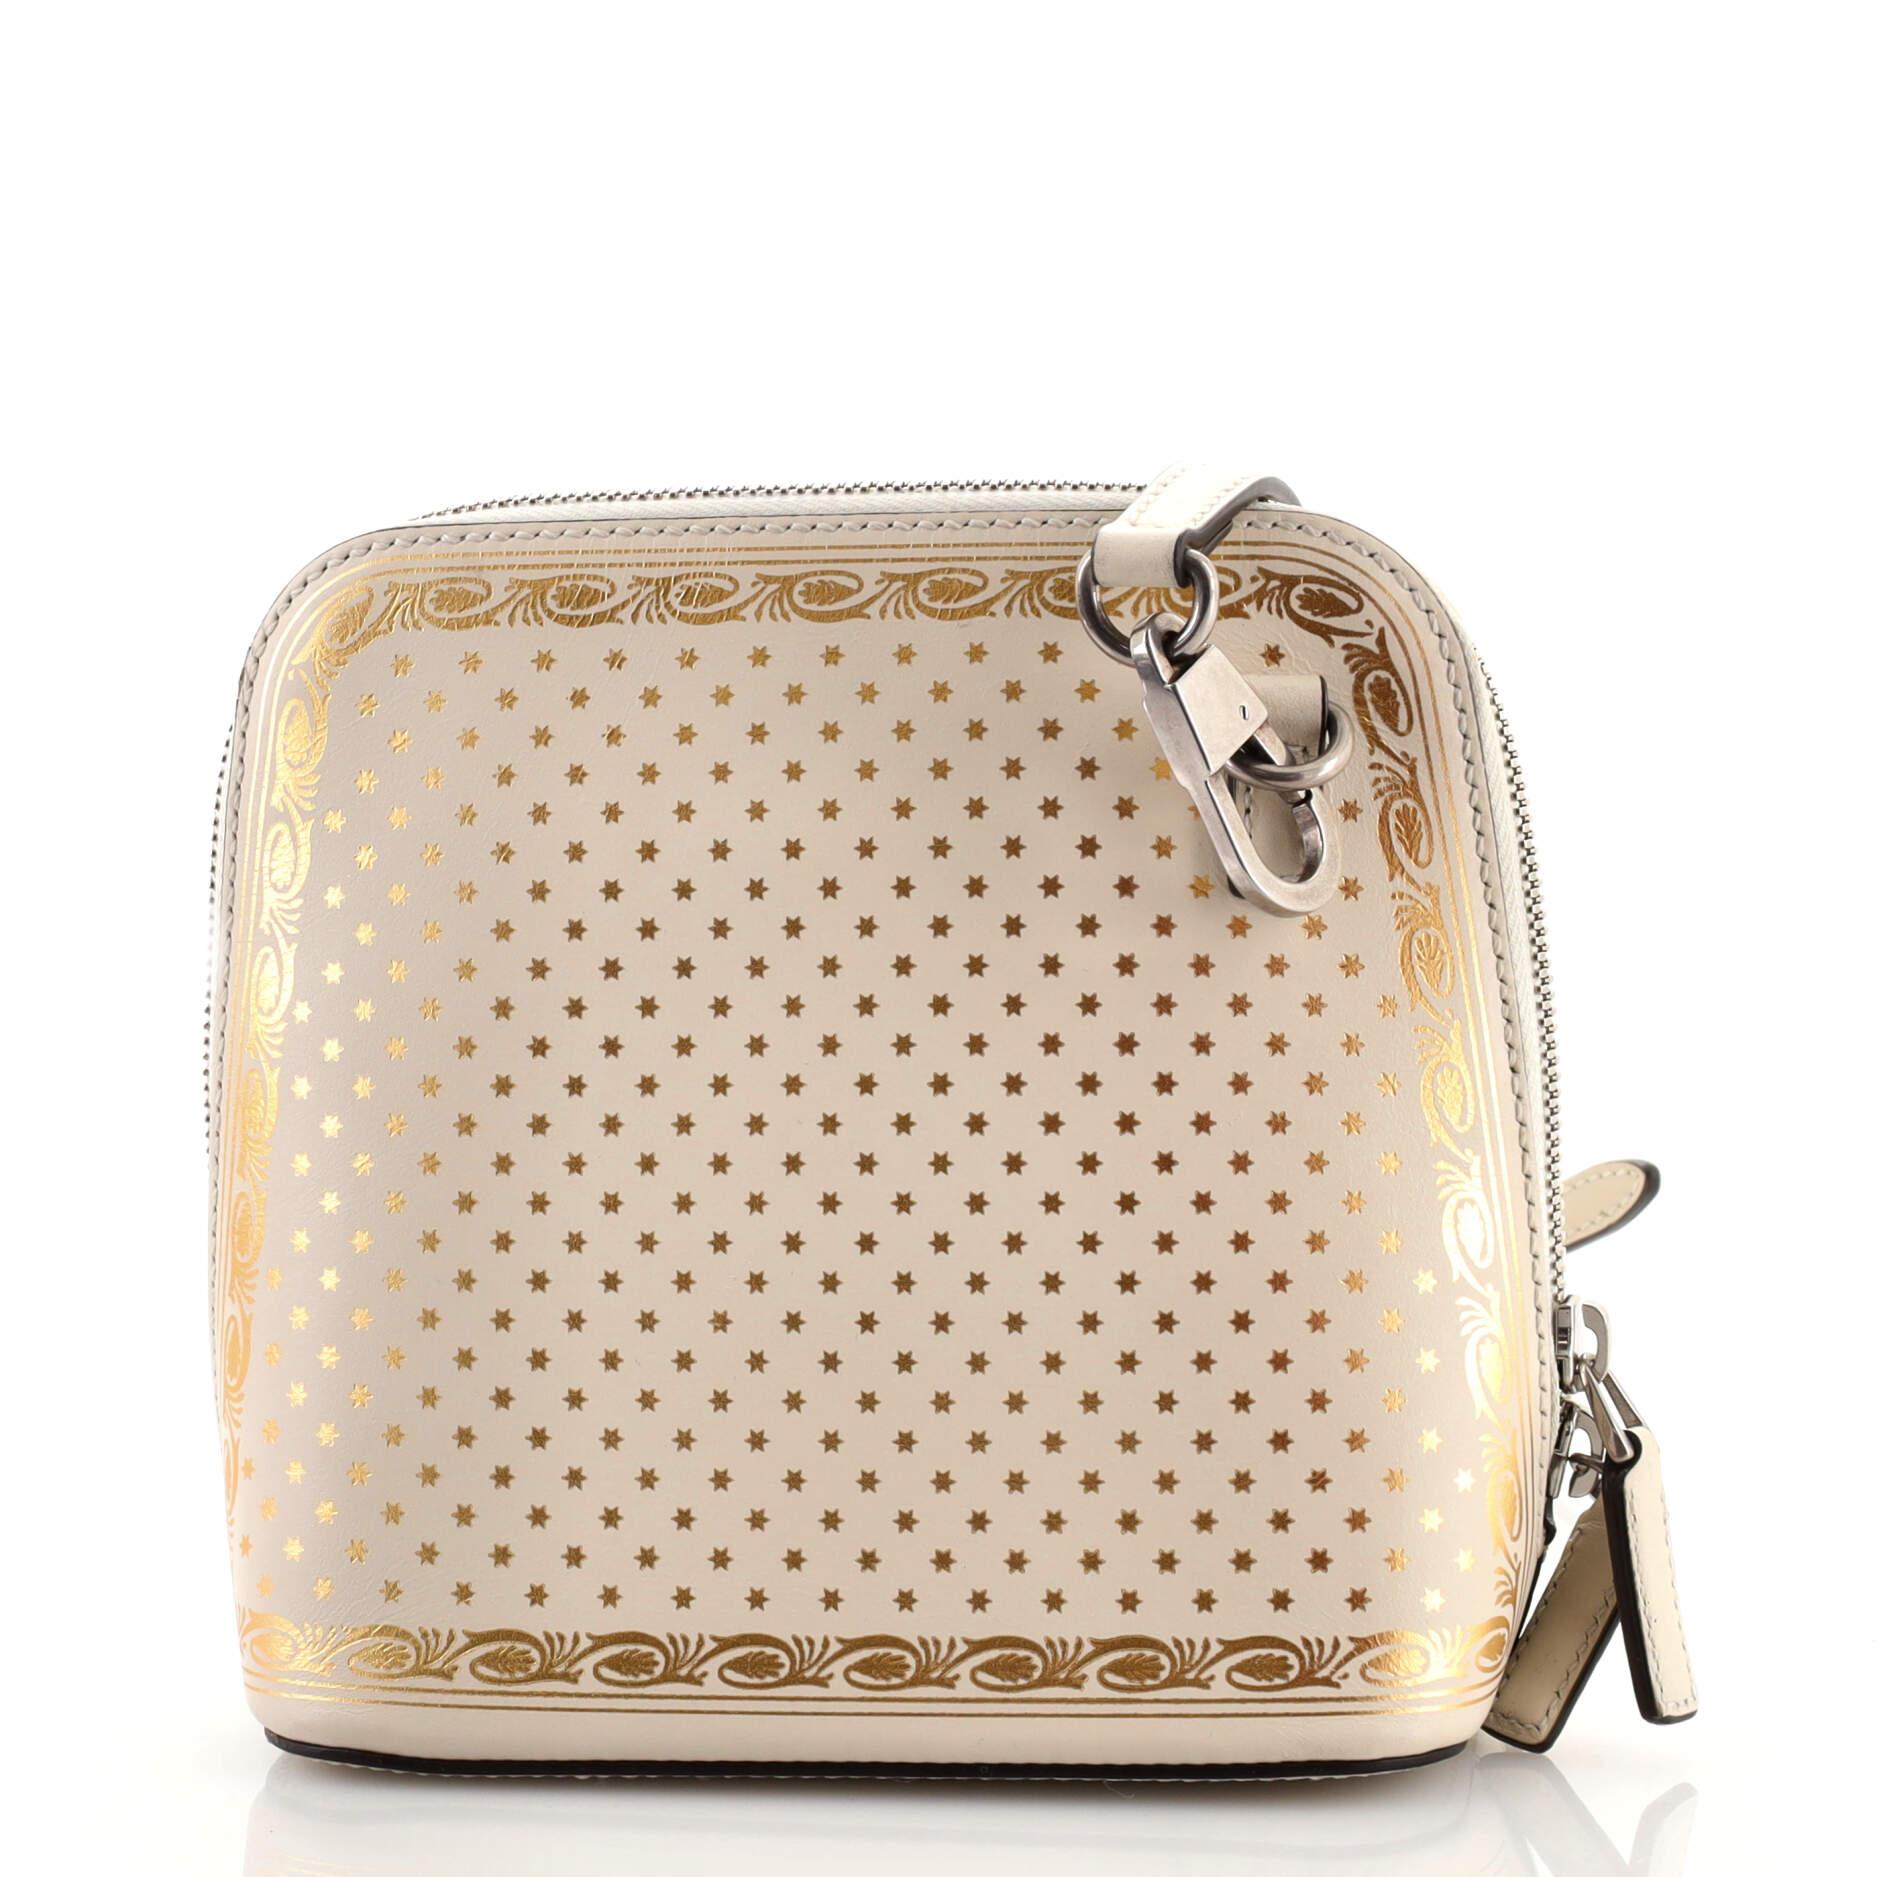 Beige Gucci Dome Crossbody Bag Limited Edition Printed Leather Mini